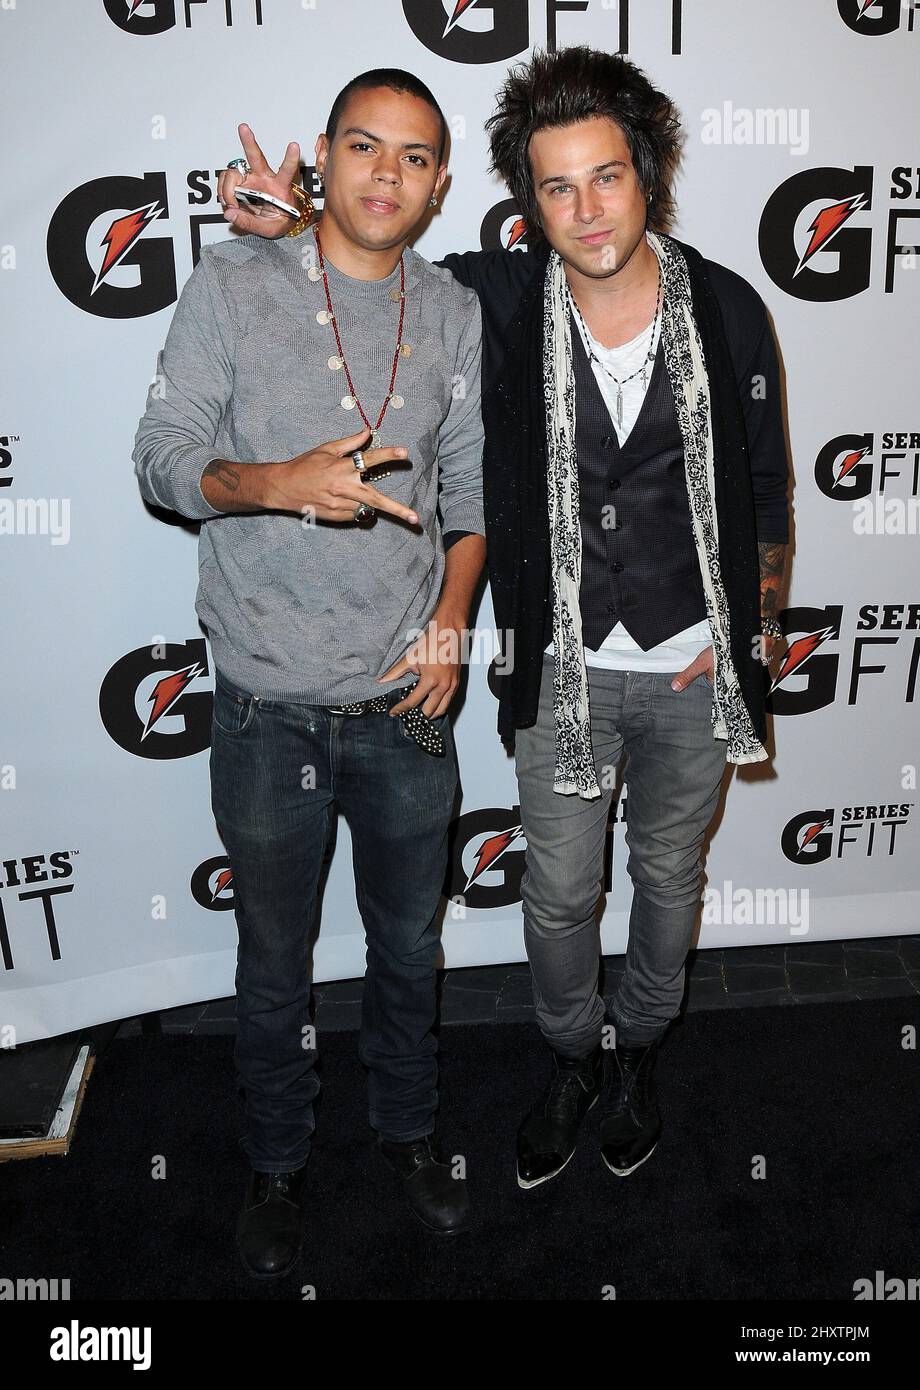 Evan Ross, Ryan Cabrera during Gatorade G Series Fit Launch Event at the SLS Hotel in Beverly Hills, California Stock Photo